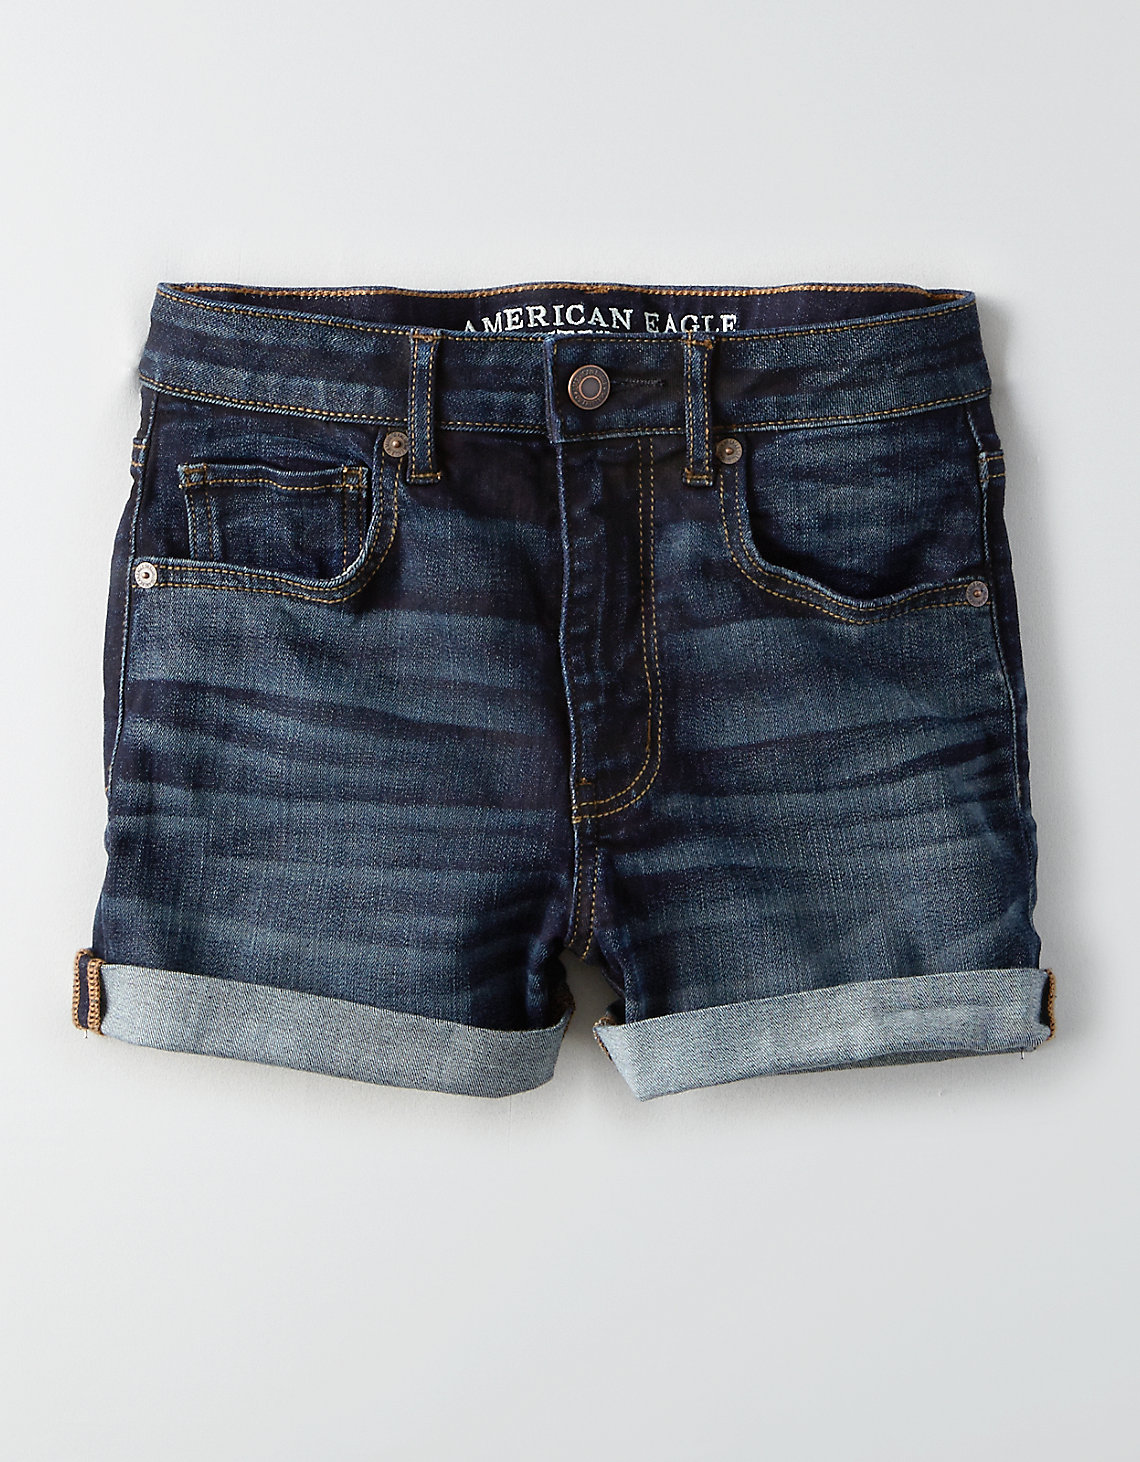 Today only: Save 50% on all shorts at American Eagle